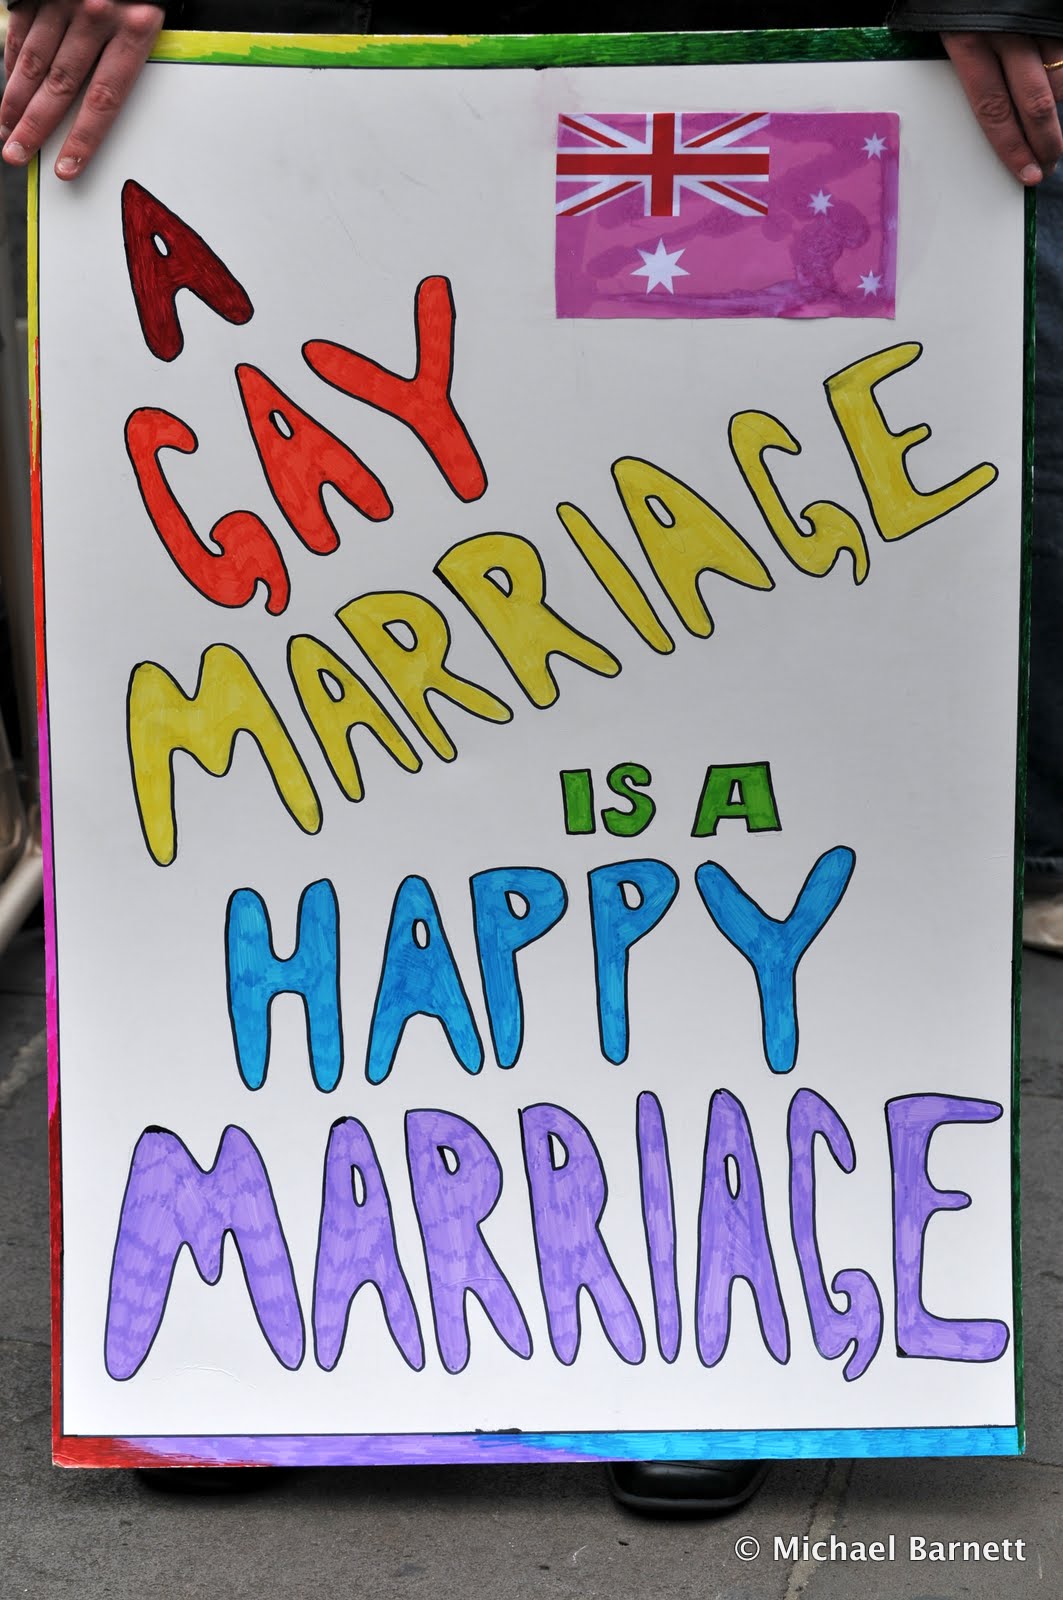 A gay marriage is a happy marriage